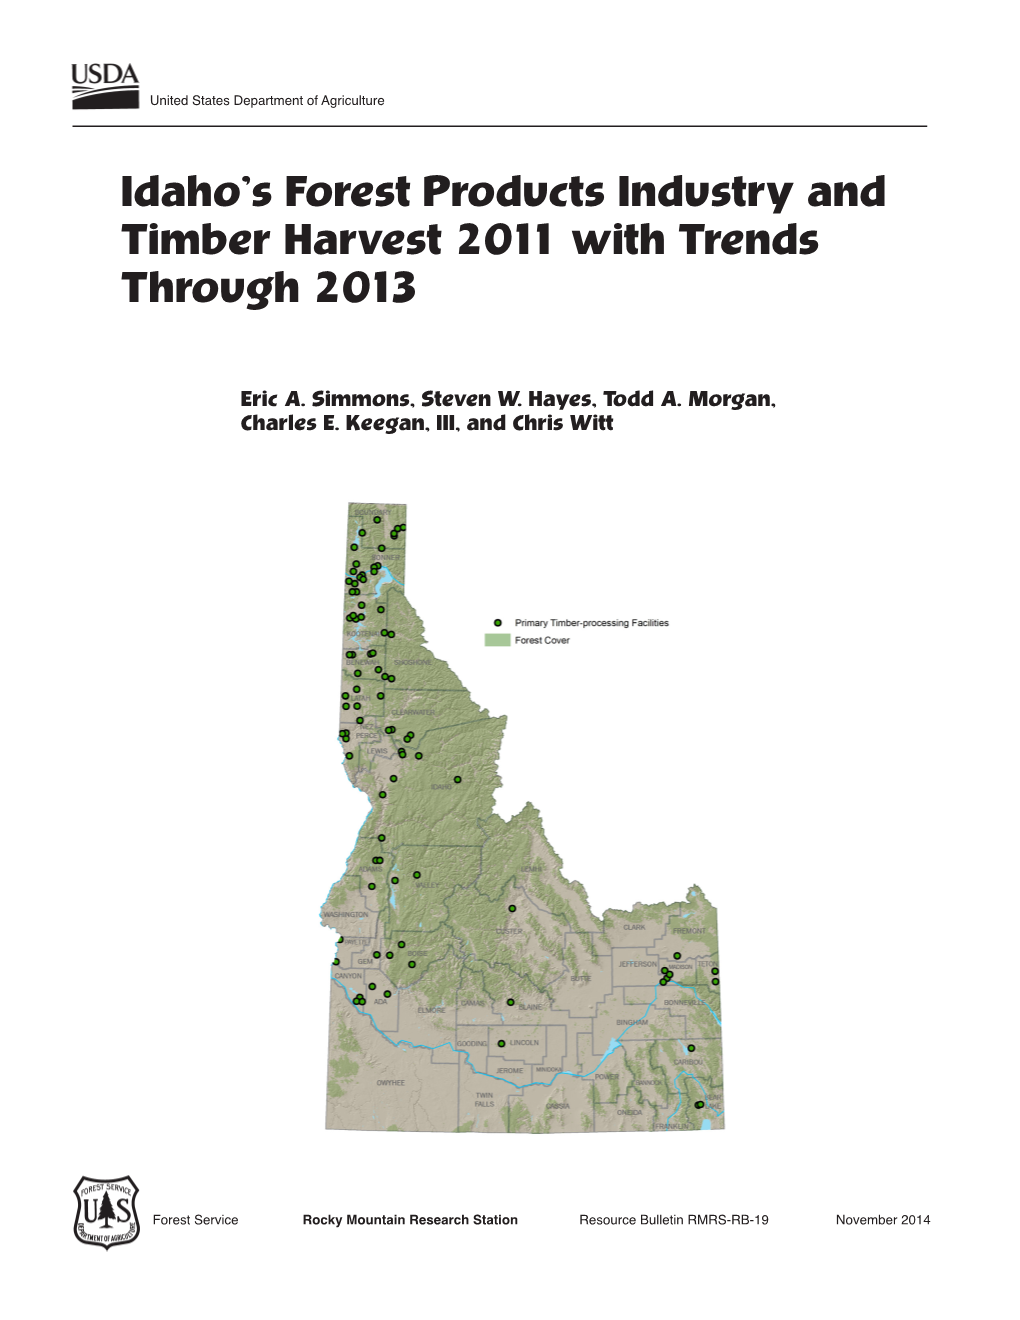 Idaho's Forest Products Industry and Timber Harvest 2011 with Trends